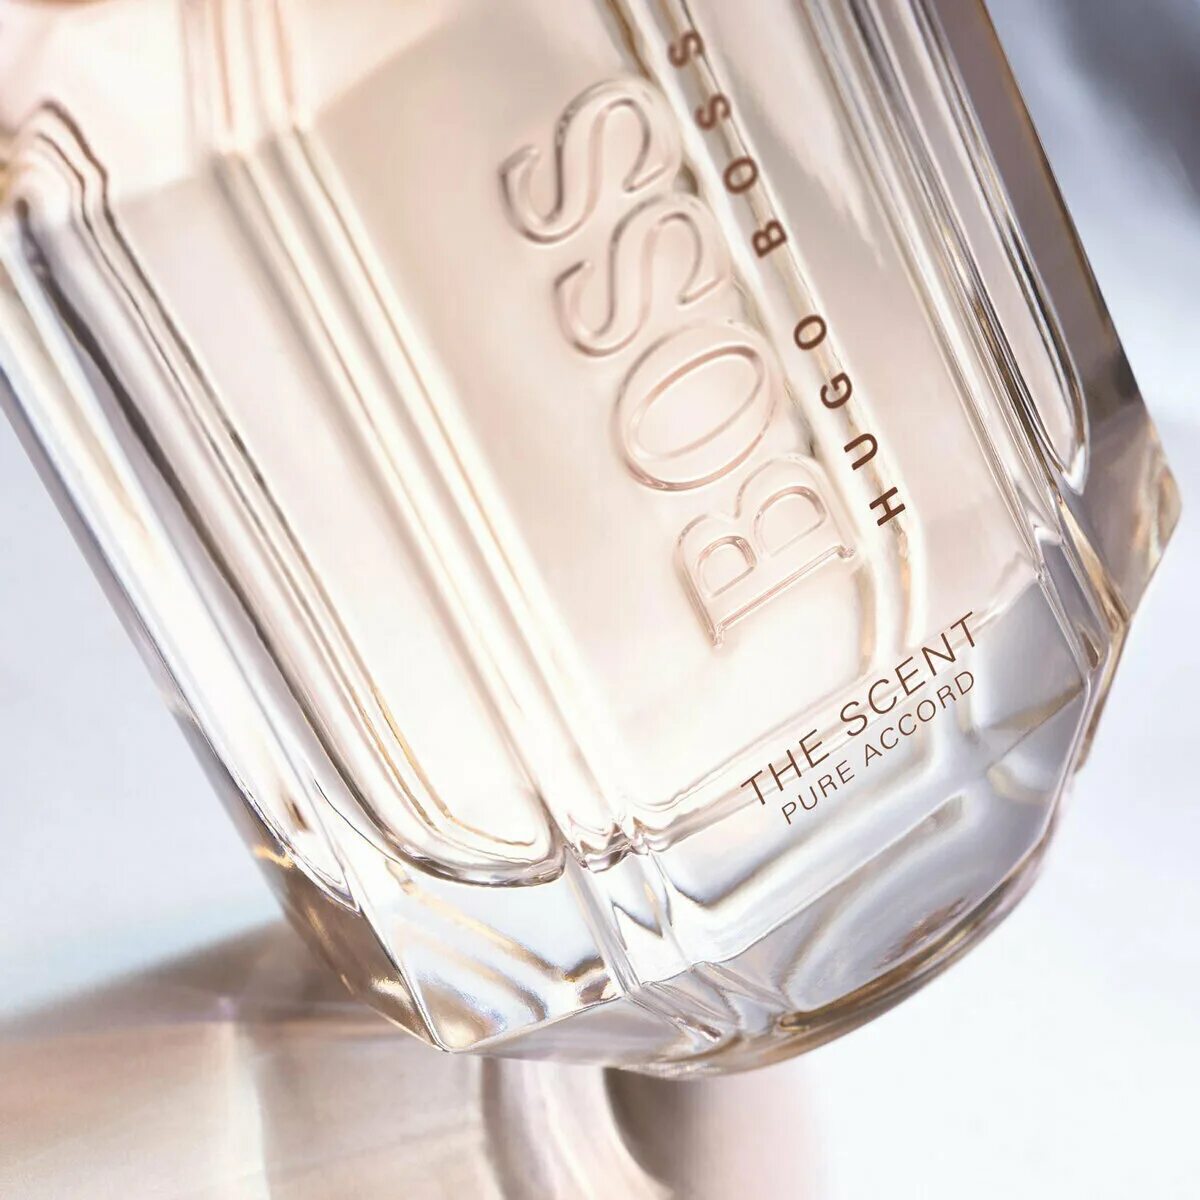 Hugo Boss the Scent Pure Accord for her. Boss the Scent Pure Accord женский. Hugo Boss the Scent Pure Accord. Hugo Boss "the Scent Pure Accord" 100 ml. Парфюмерная вода boss the scent for her